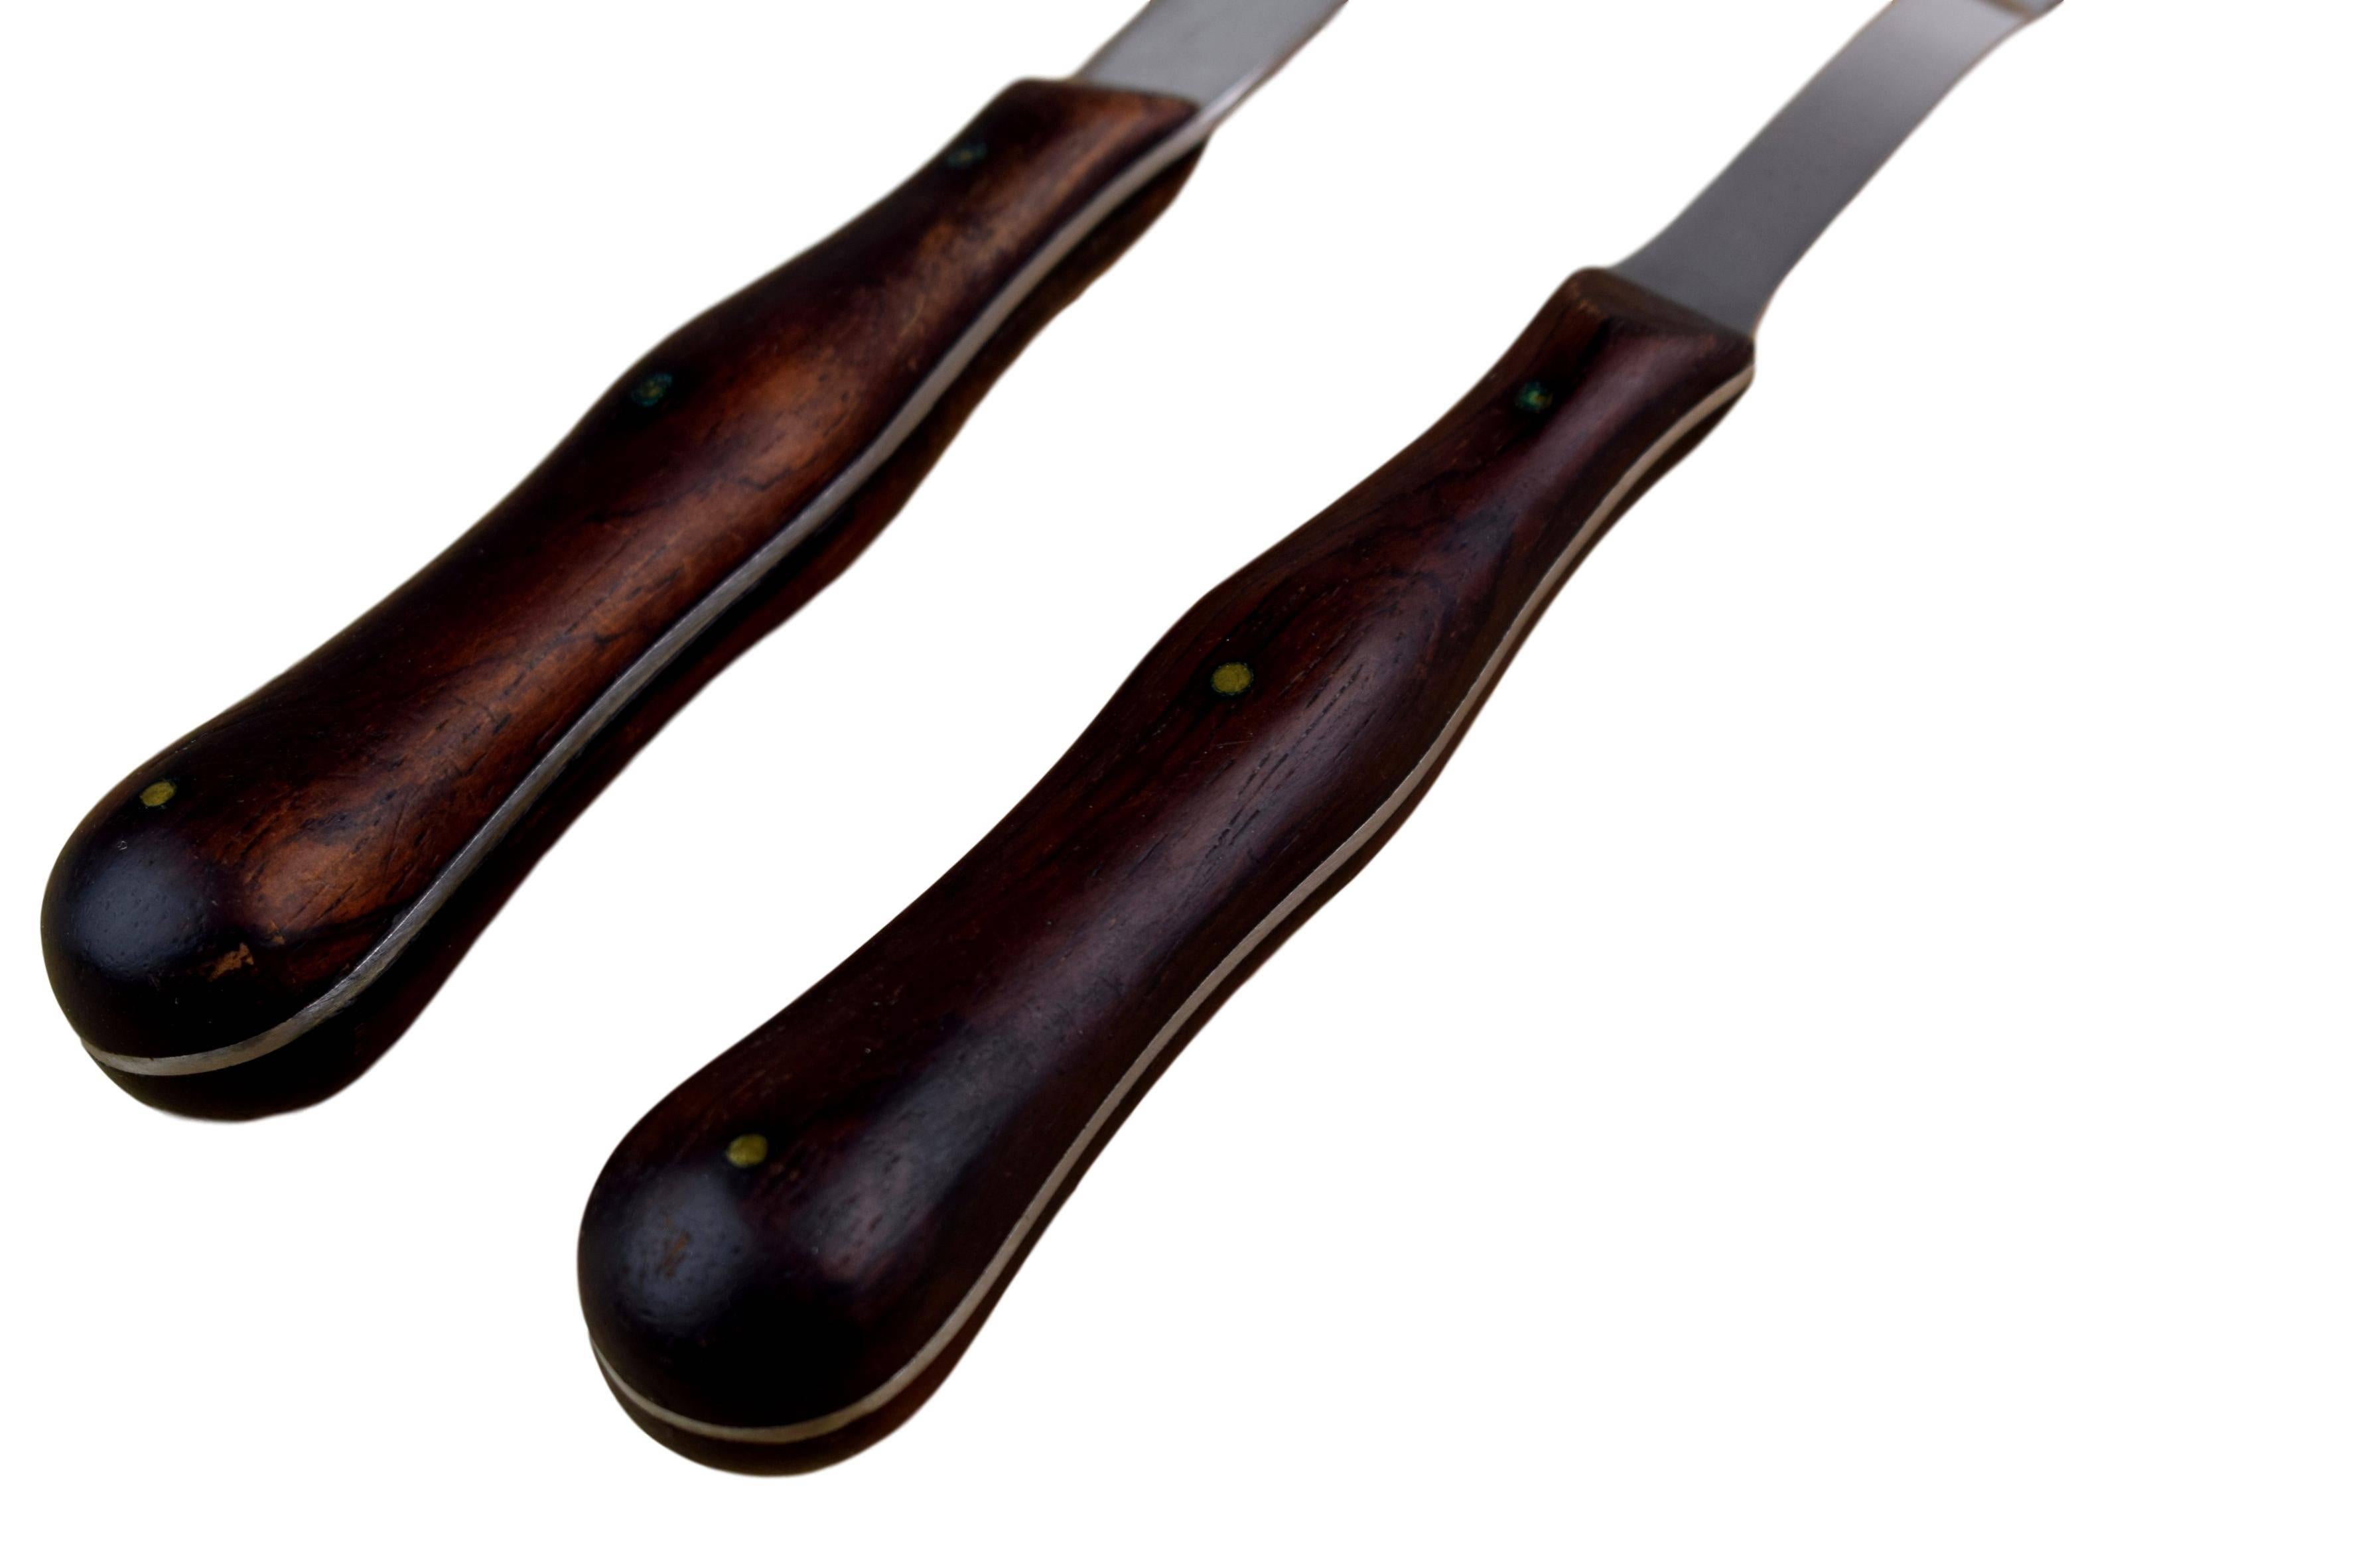 A Danish midcentury carving knife and fork by Kay Bojesen (1886-1958). Rosewood handles. Produced by Universal Steel Company, Copenhagen. Marked 